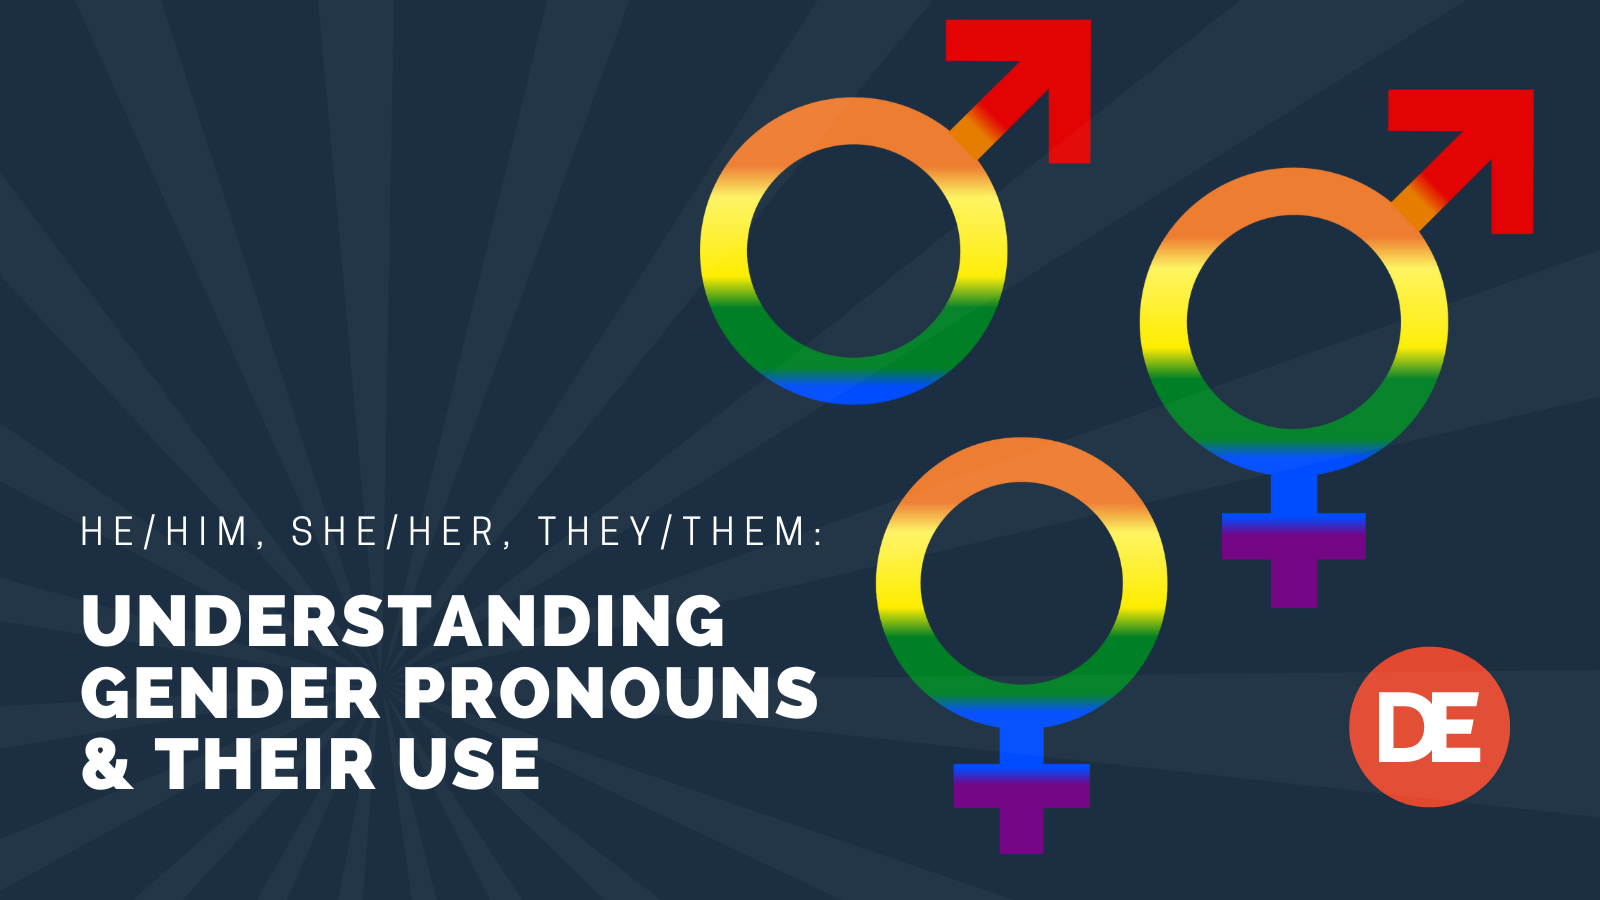 he-him-she-her-they-them-understanding-gender-pronouns-their-use-directemployers-association